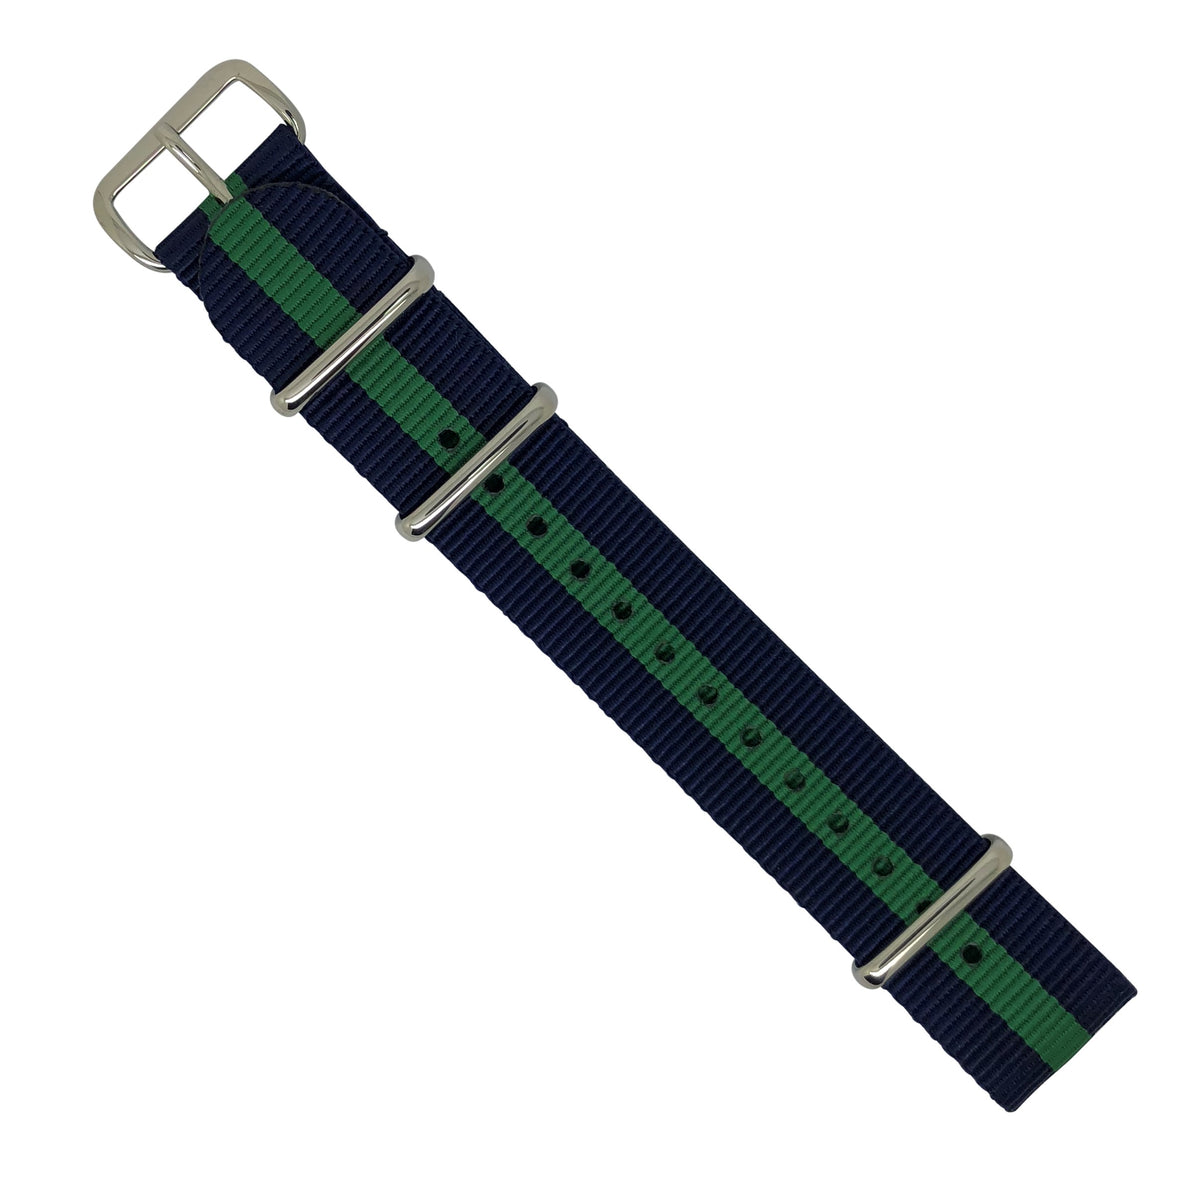 Premium Nato Strap in Navy Green with Polished Silver Buckle (20mm) - Nomad watch Works